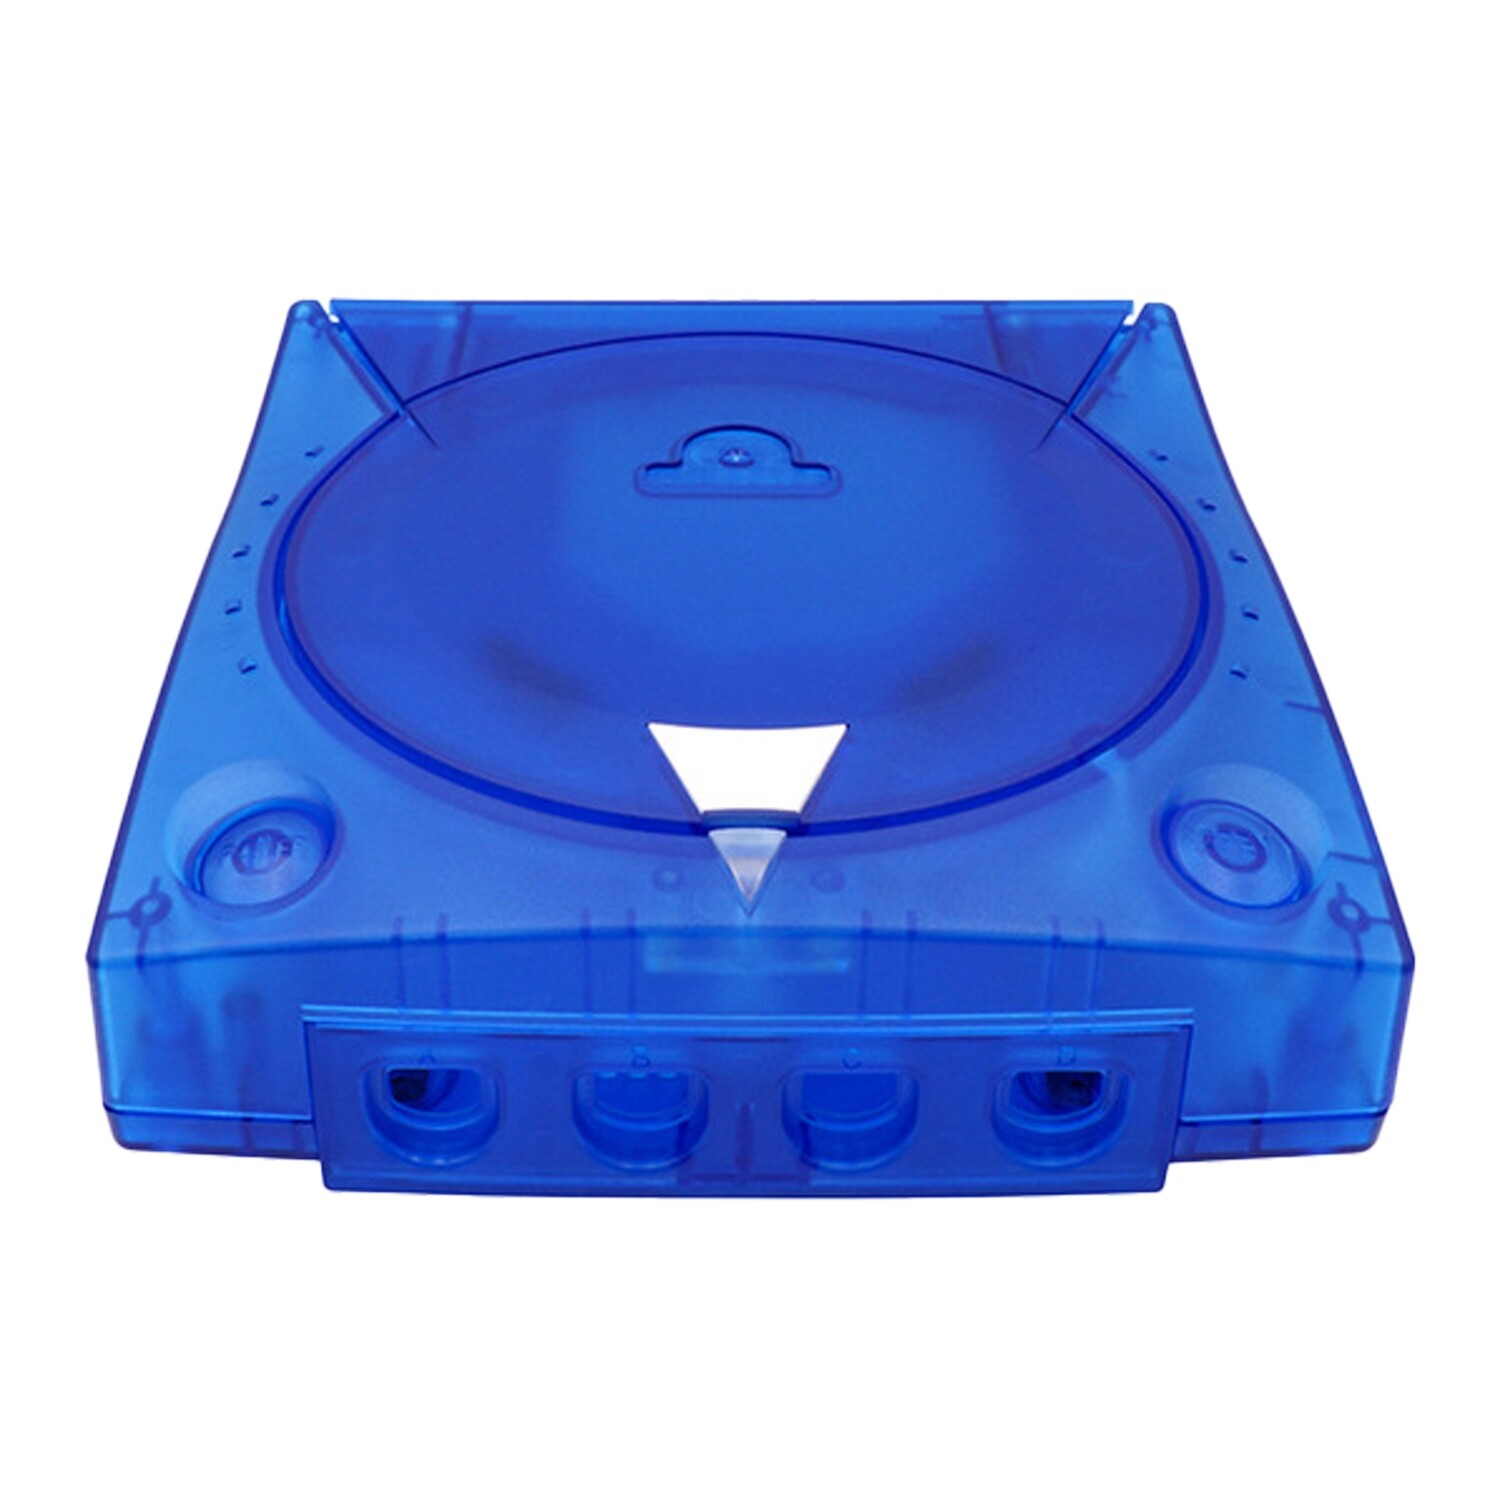 SEGA Dreamcast Replacement Shell